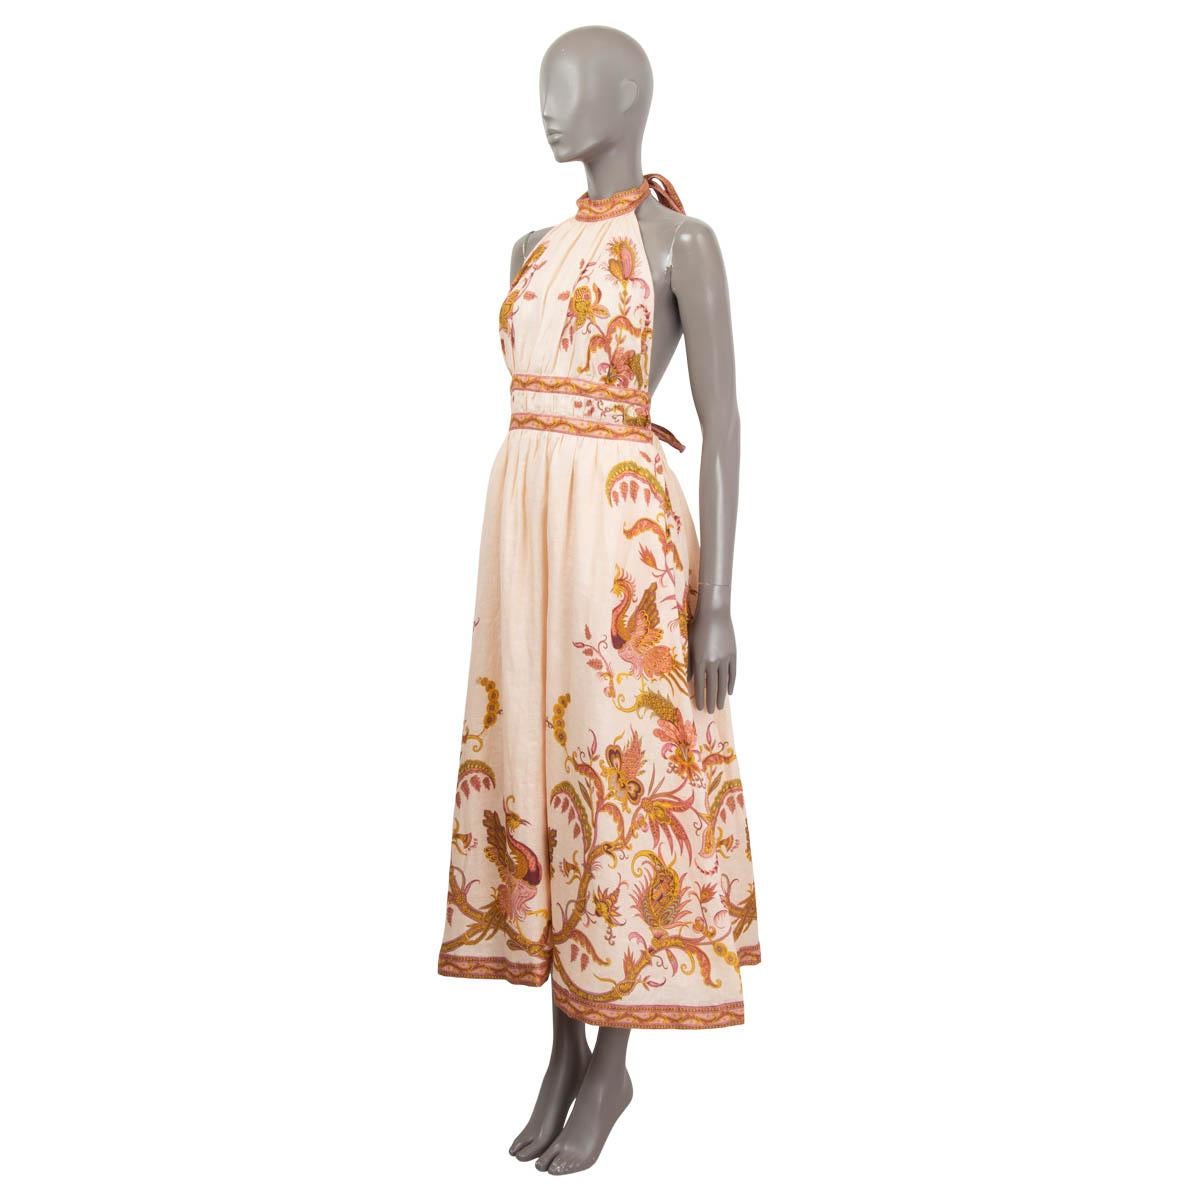 100% authentic Zimmermann Cassia halter bow midi dress in salmon linen (100%). Lined in salmon colored cotton (100%). Closes with a halter bow behind the neck and can be adjusted with a bow tie in the back. Features a stretchy waistband through the